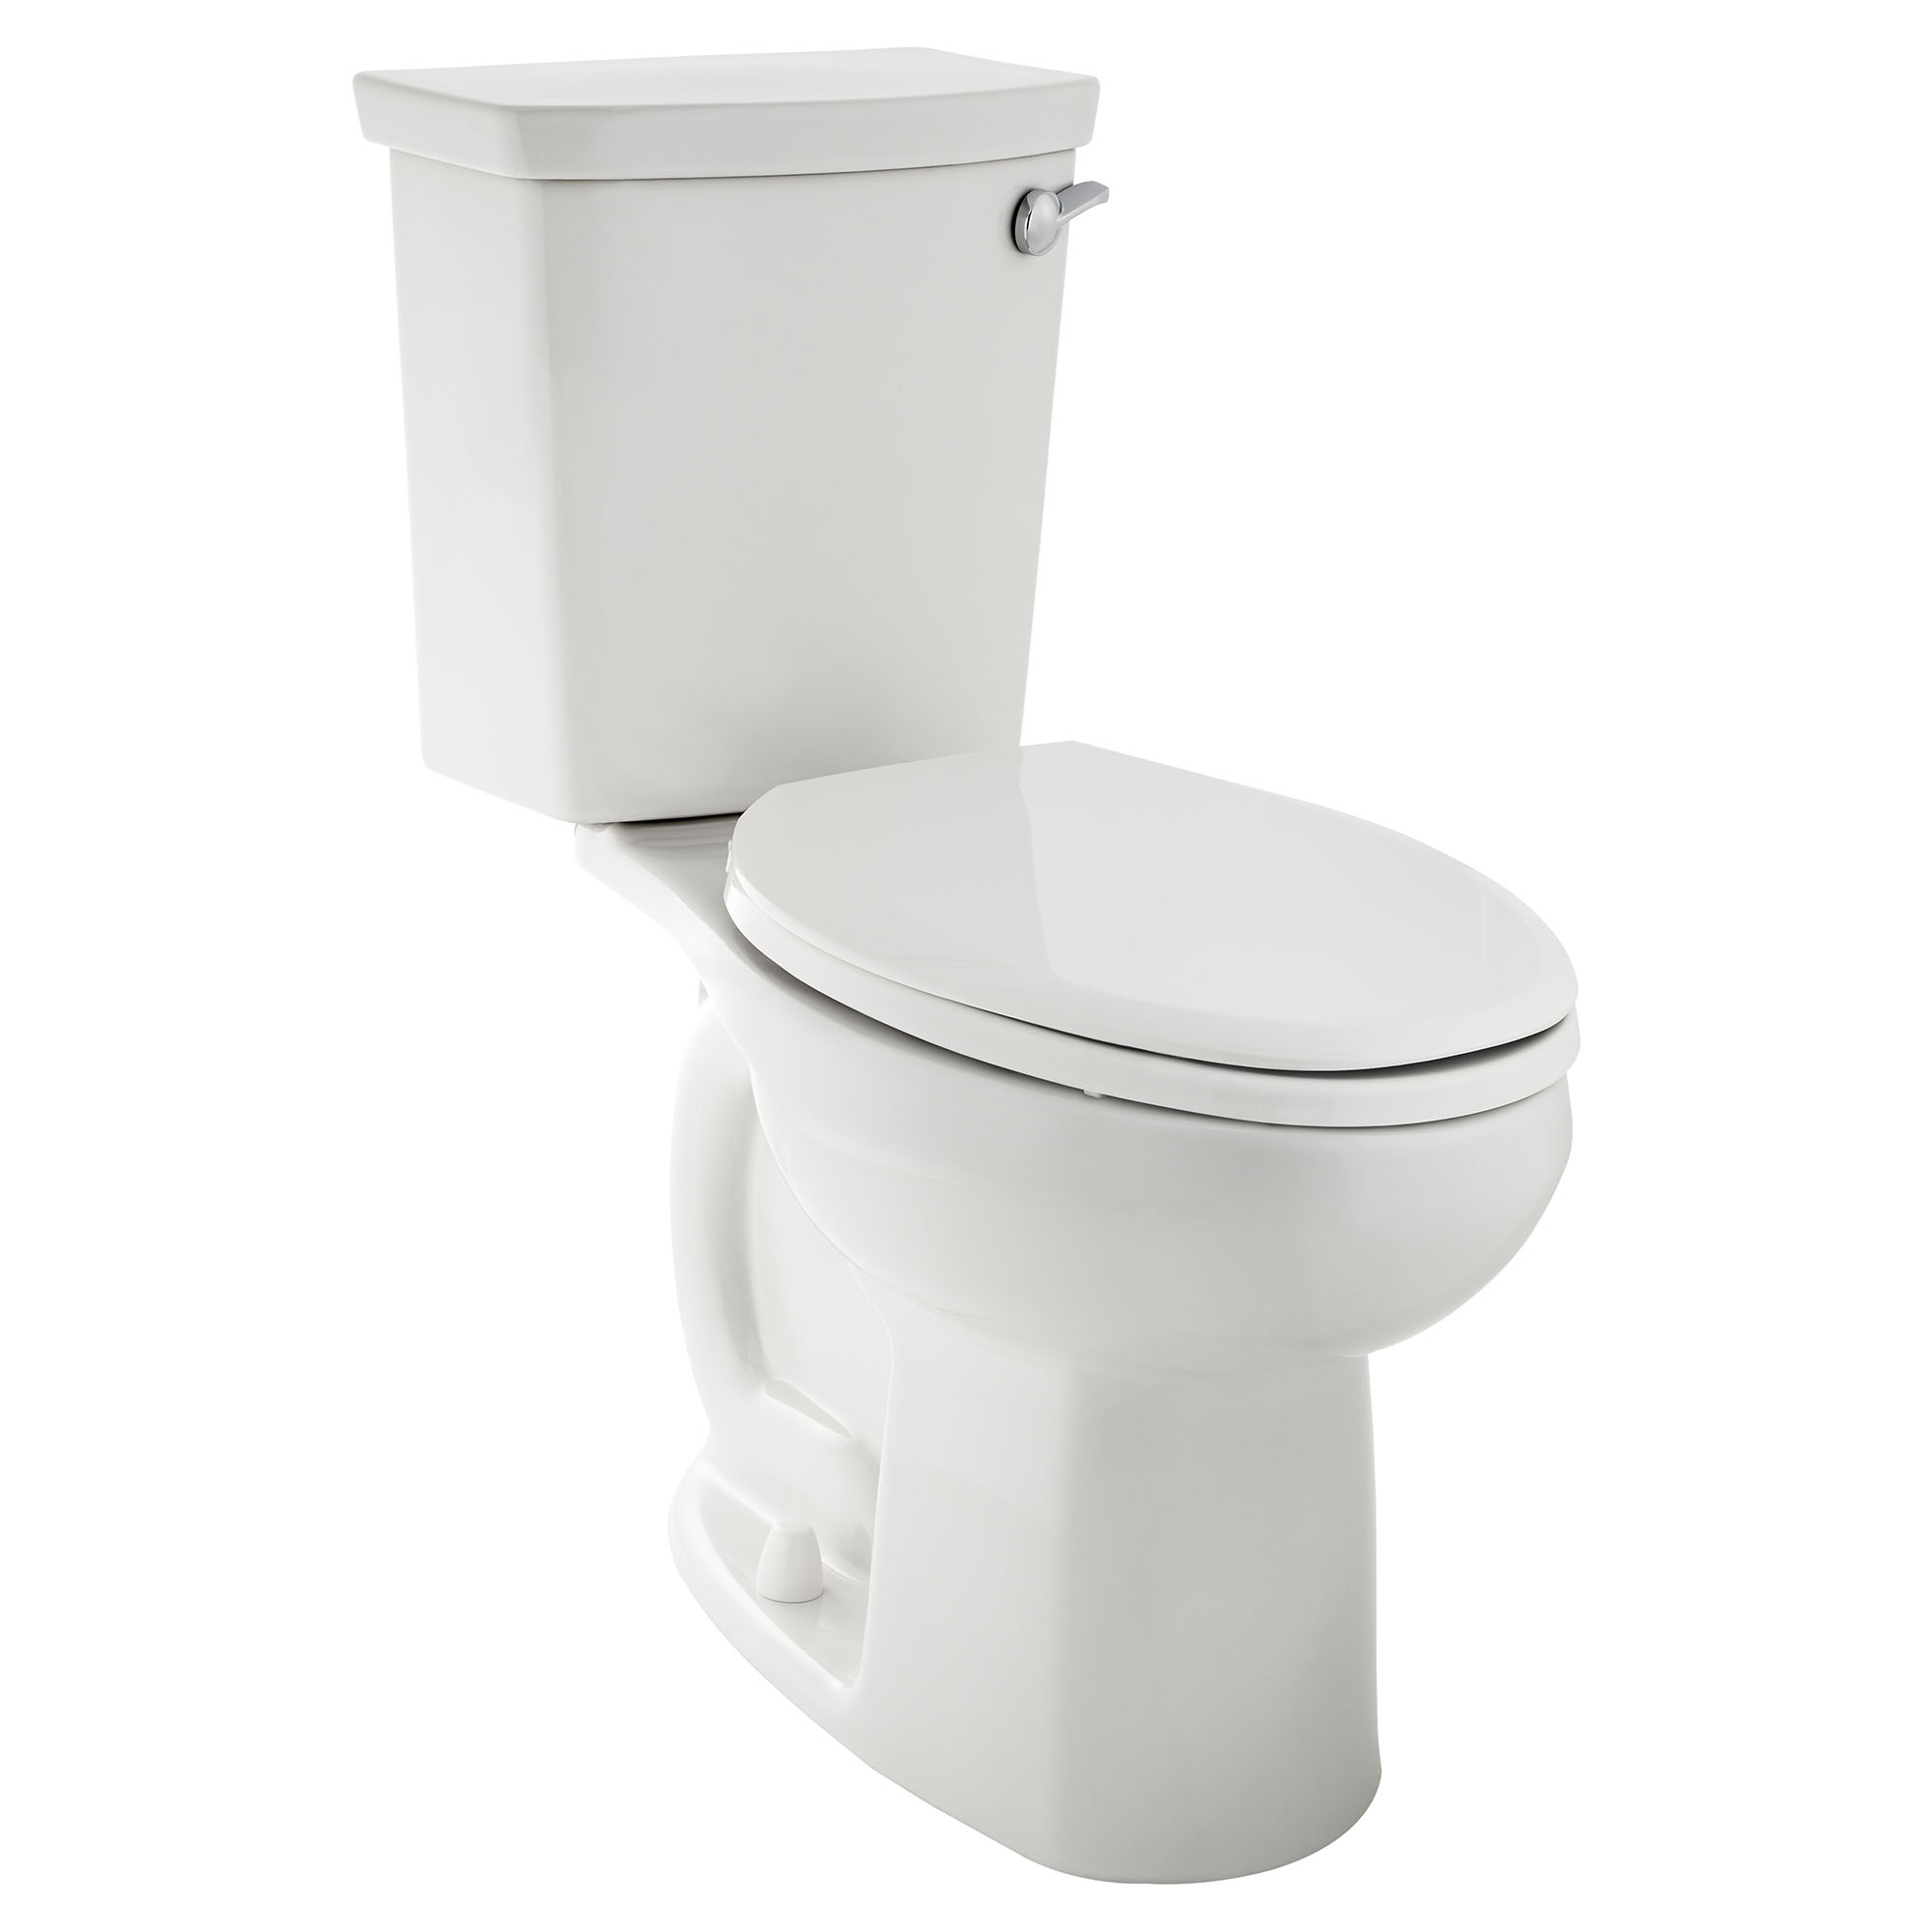 WATERMONY 1.46 GPF Elongated Comfort Height Floor Mounted One-Piece Toilet  (Seat Included) & Reviews